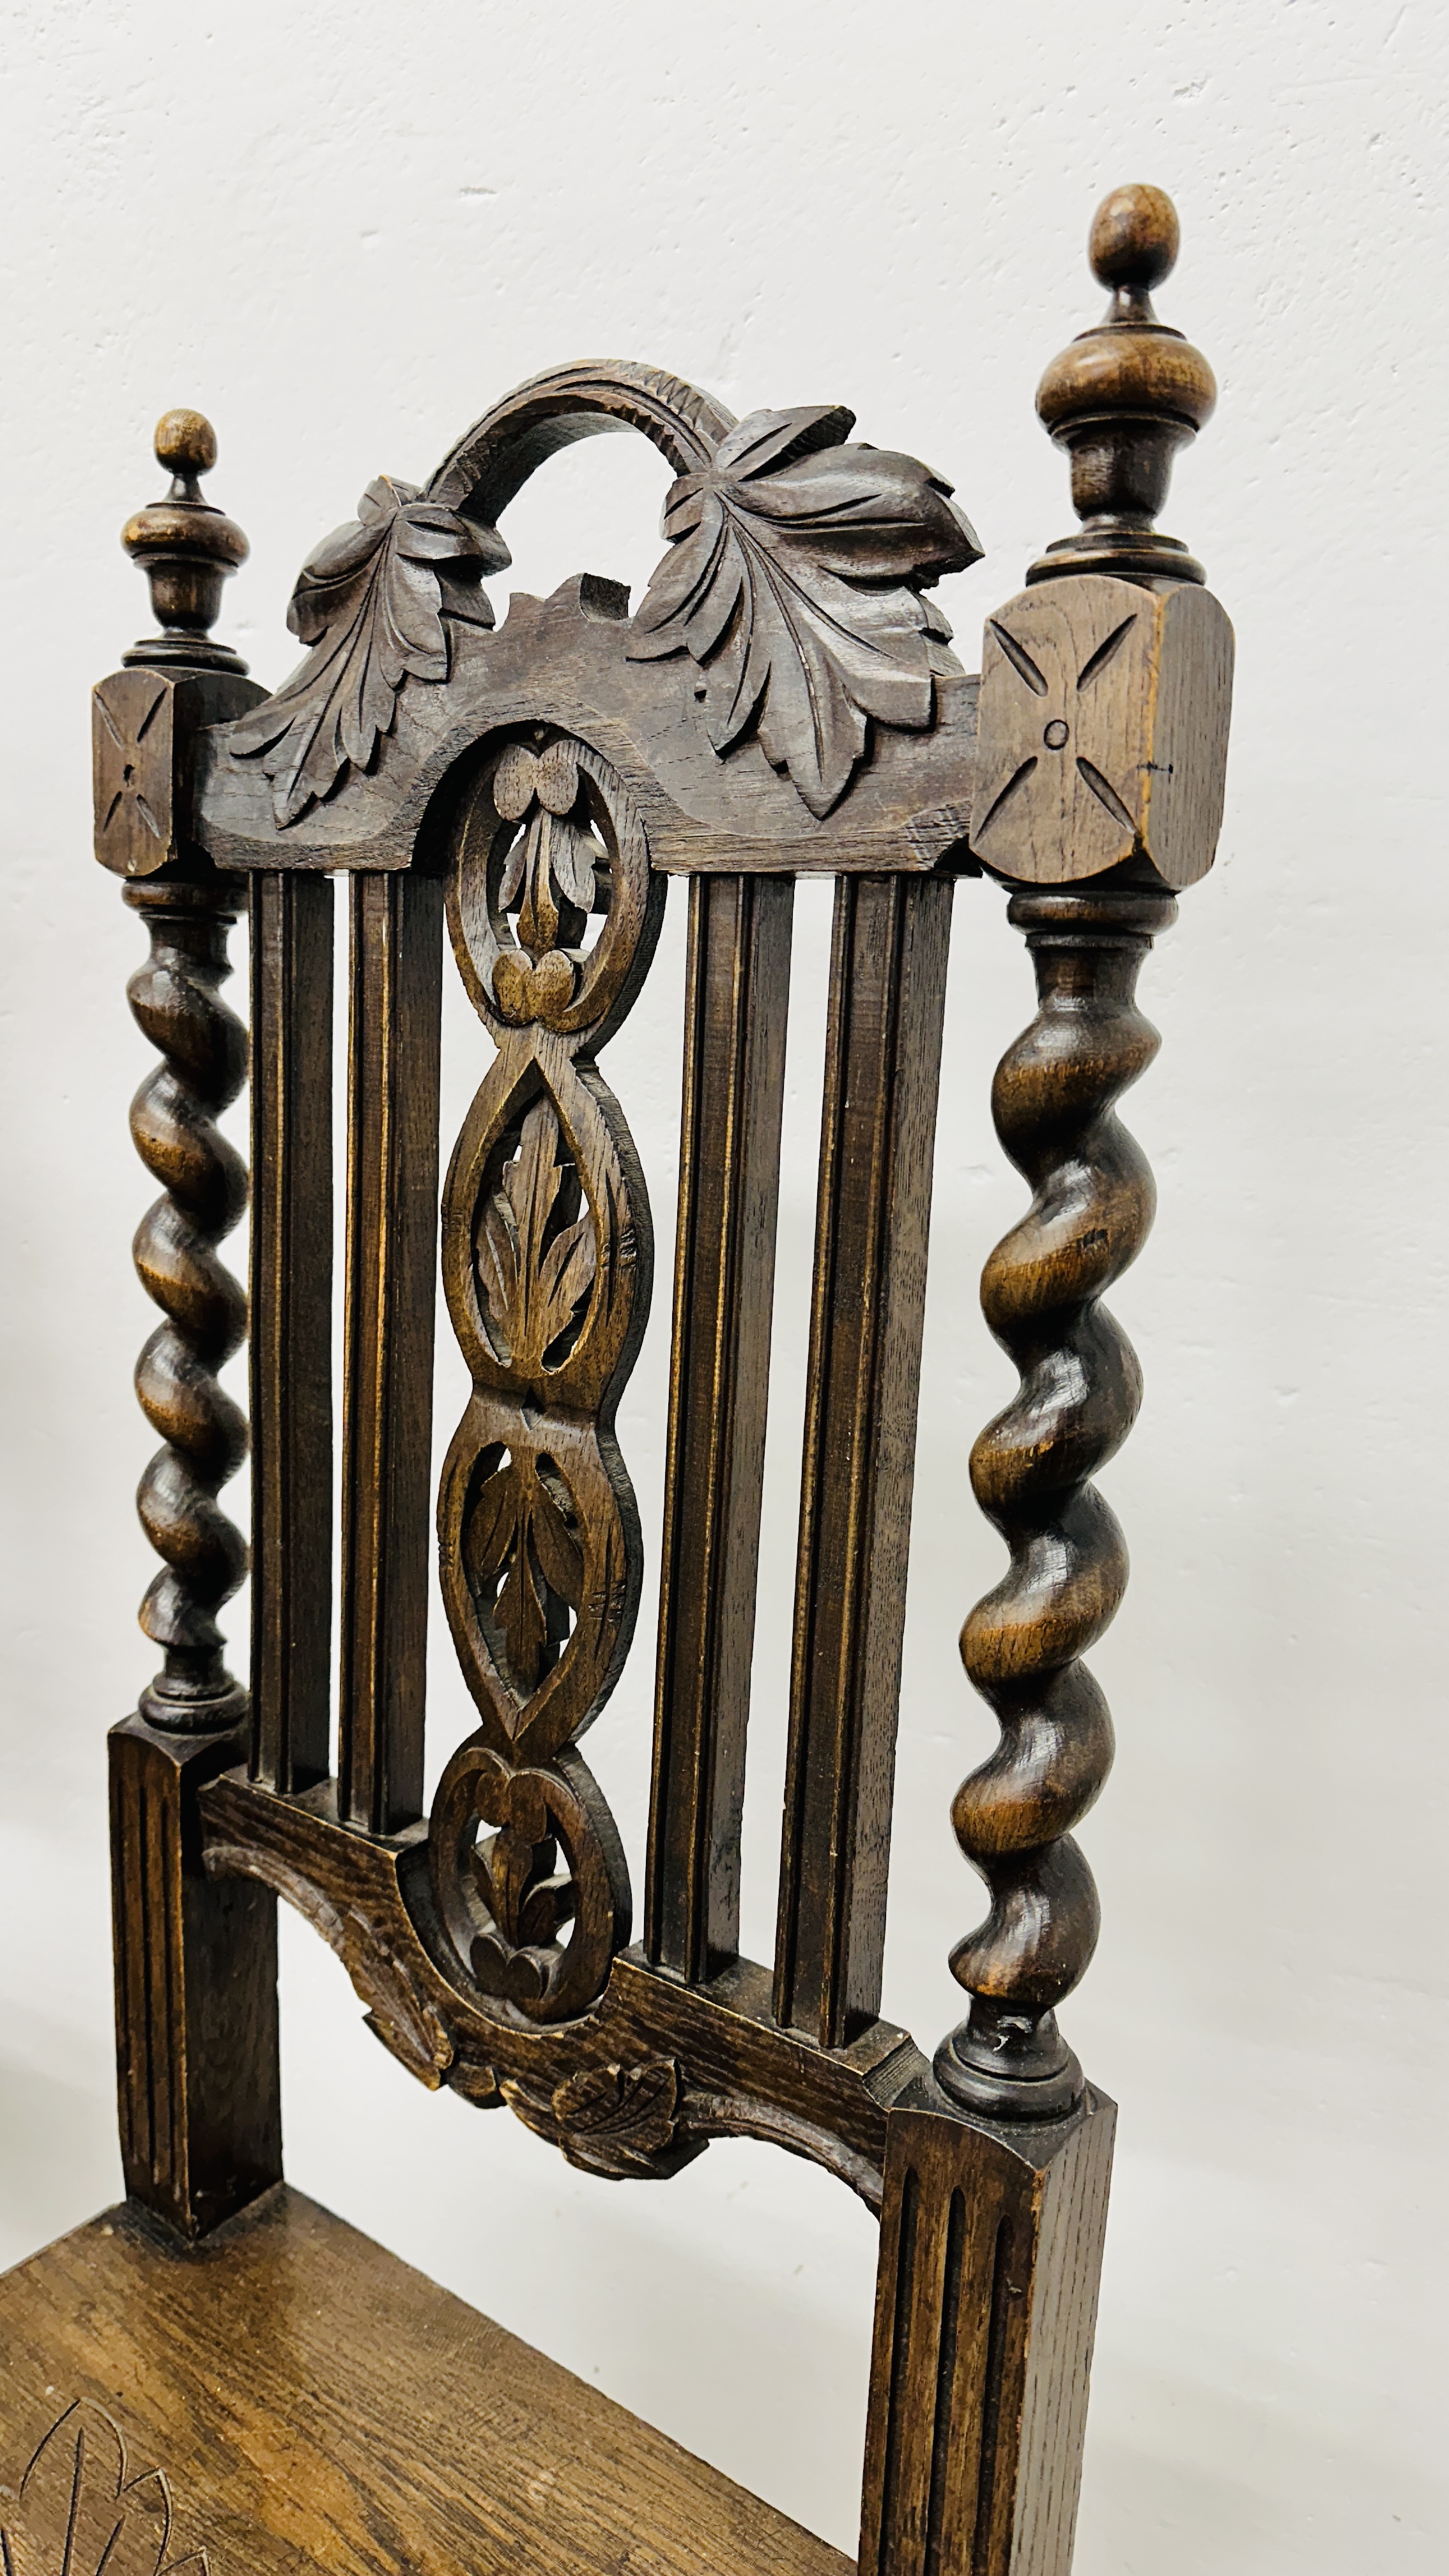 A PAIR OF ANTIQUE OAK HALL CHAIRS WITH CARVED DETAIL AND BARLEY TWIST SUPPORTS. - Image 5 of 9